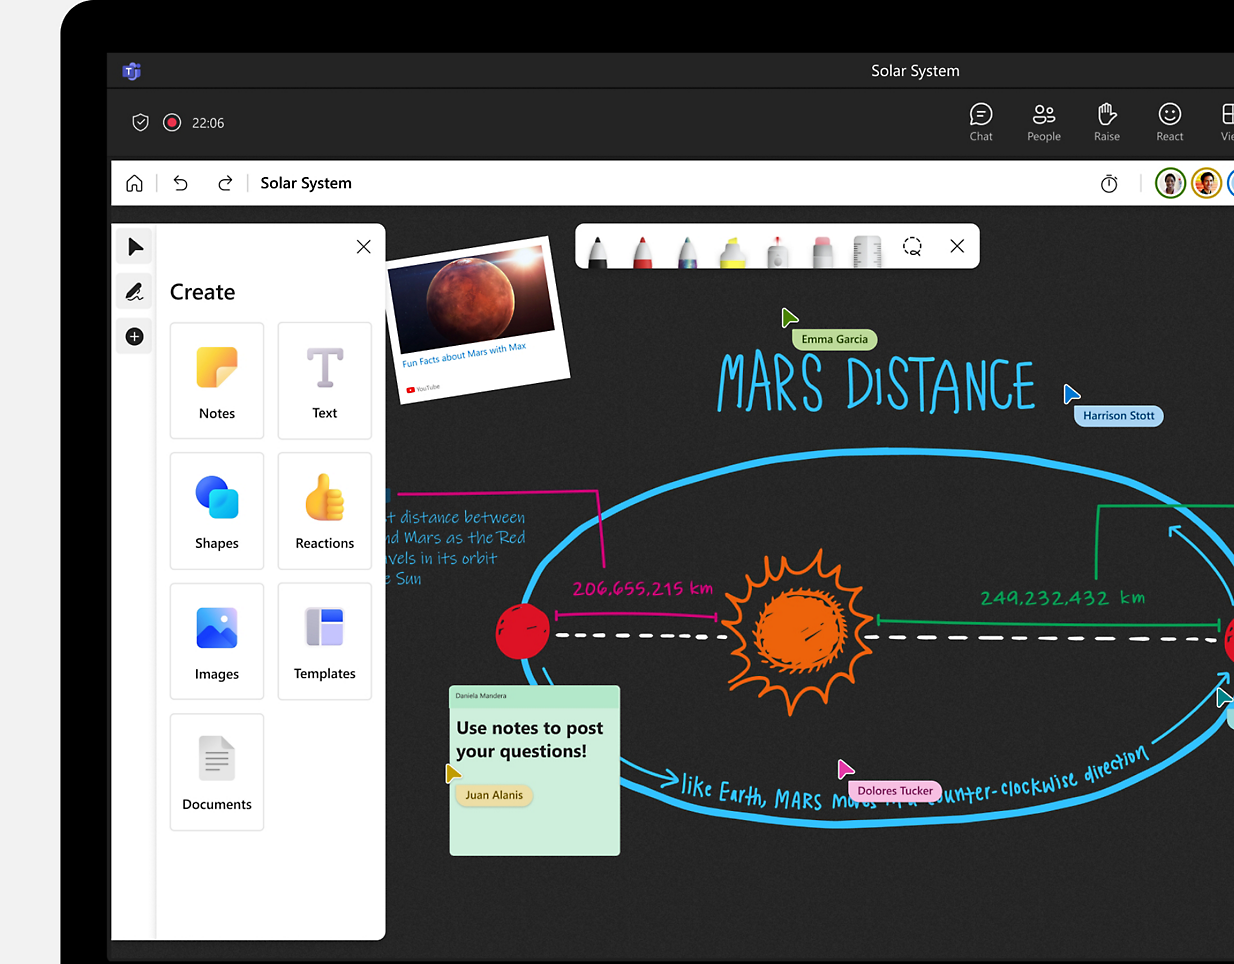 A Whiteboard session using inking and sticky notes with multiple participants learning about the solar system in a video call.